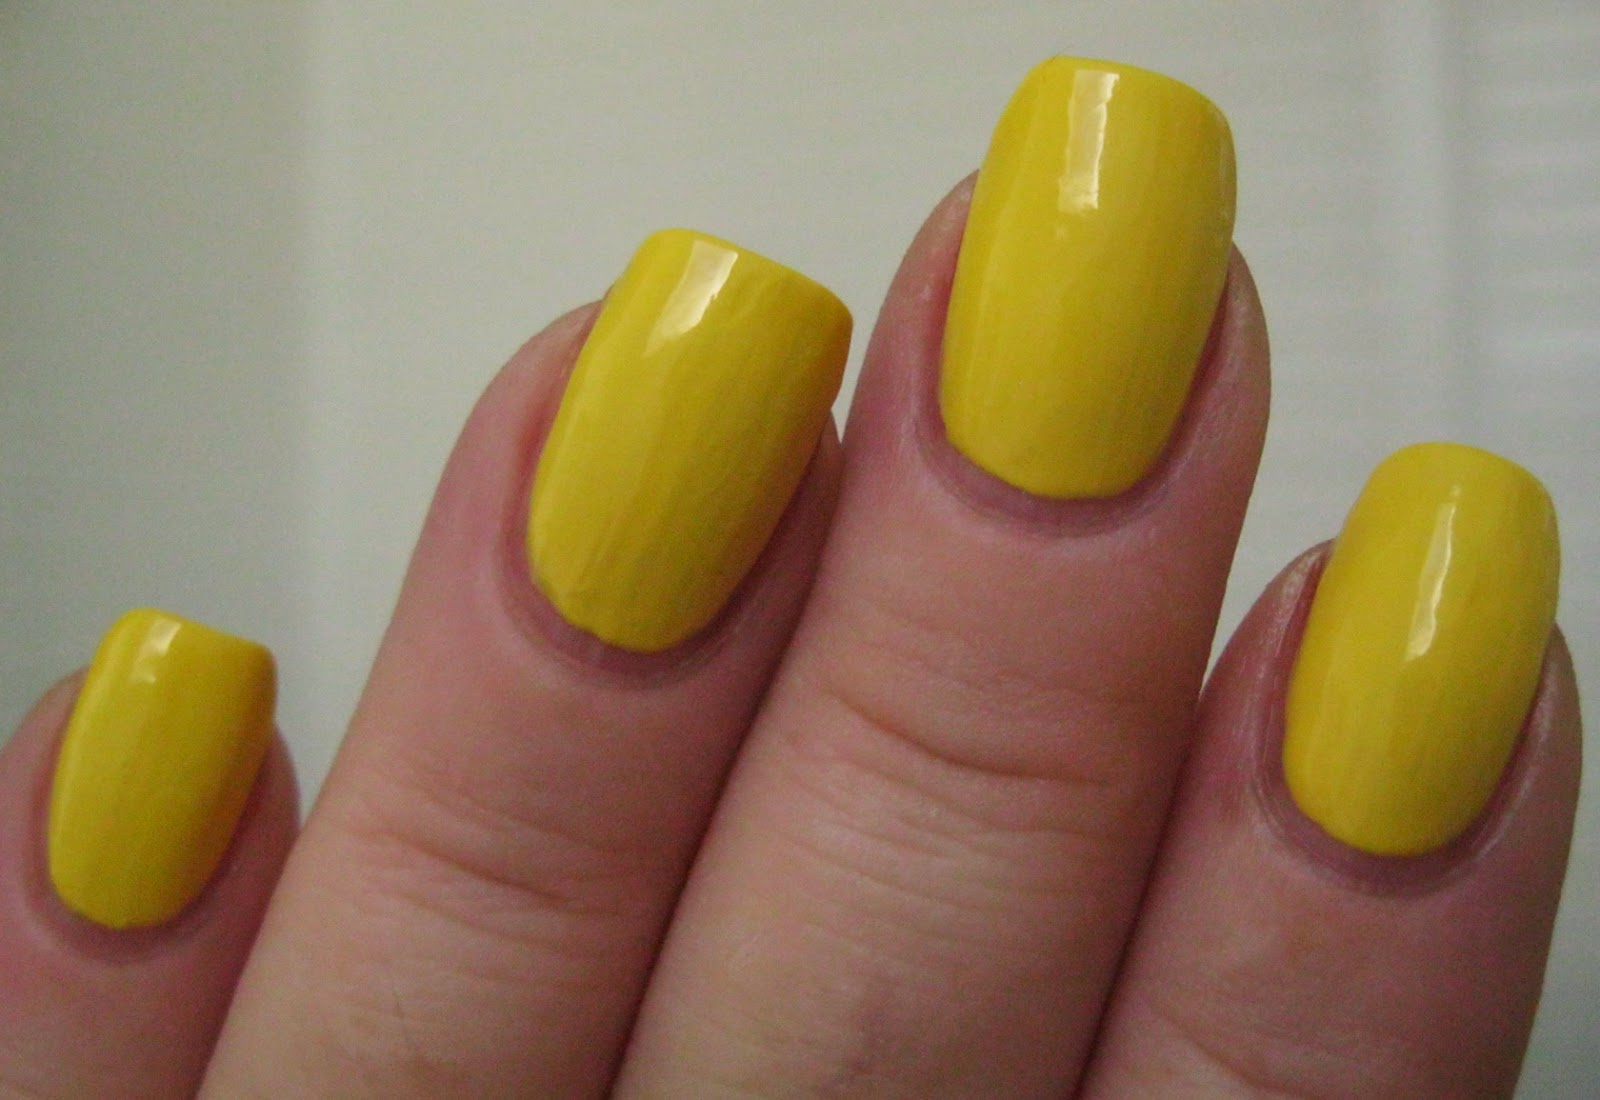 10. Sally Hansen Hard as Nails Xtreme Wear in "Mellow Yellow" - wide 2